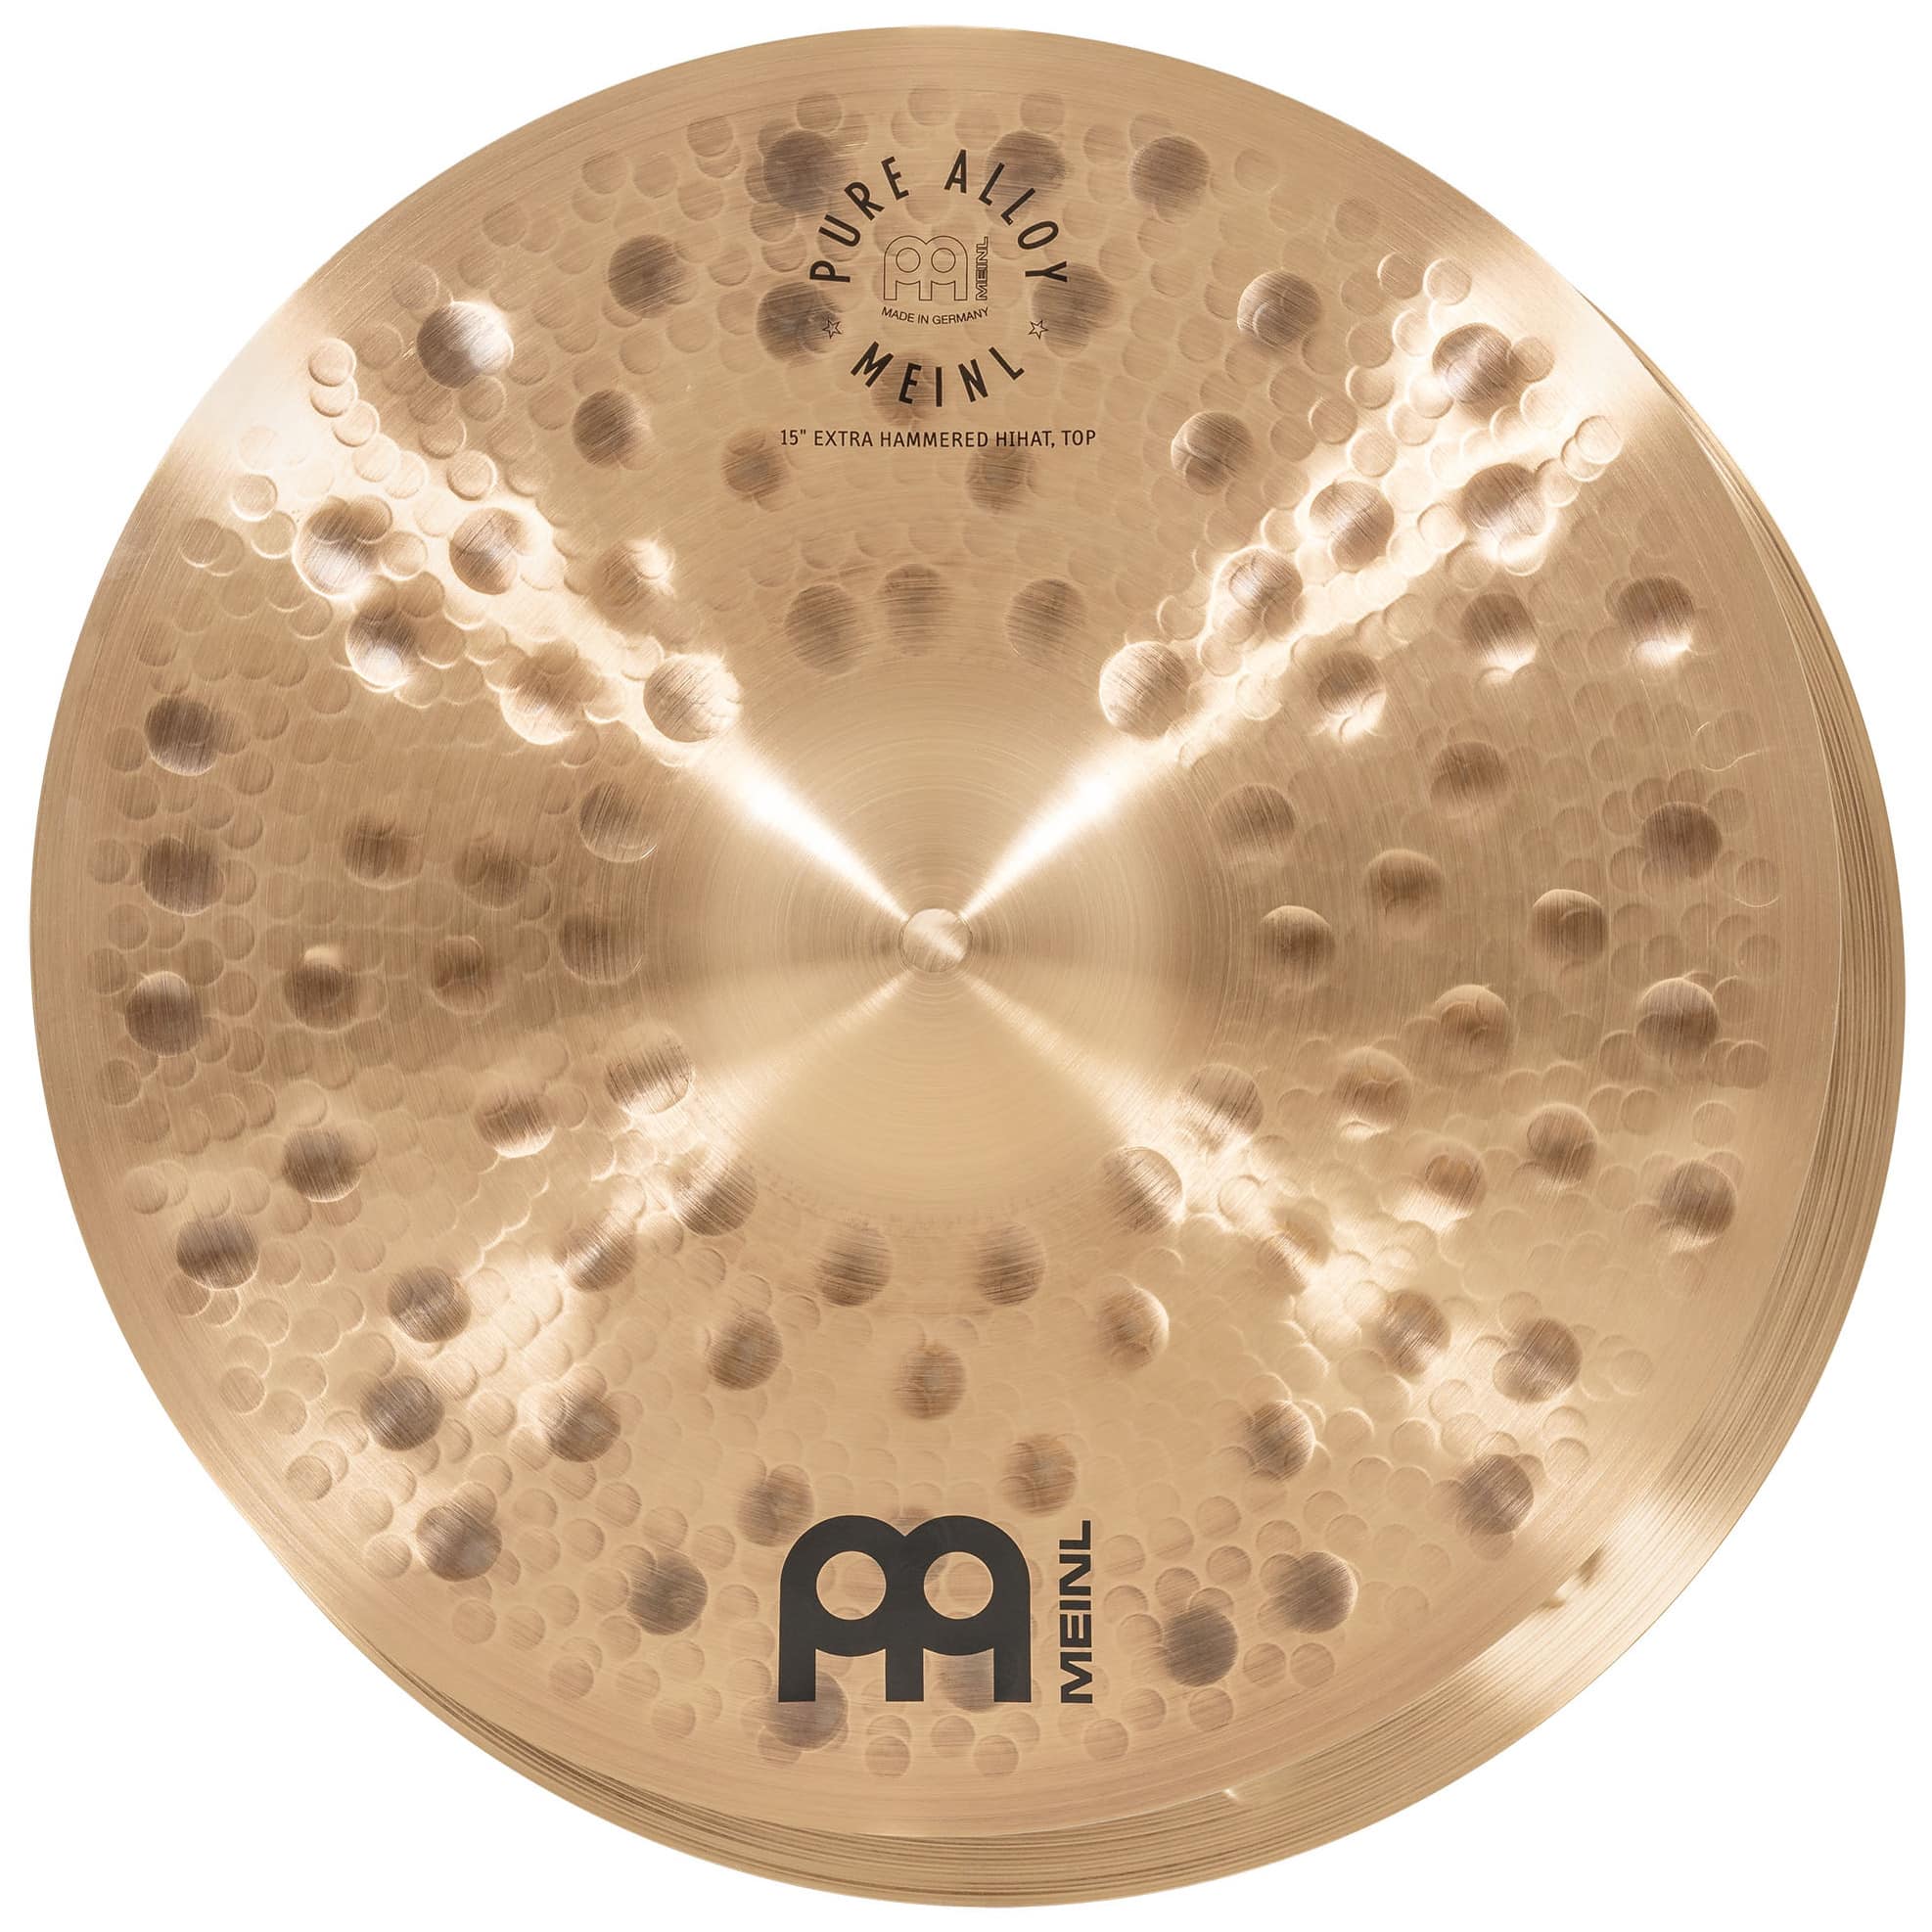 Meinl Cymbals PA-CS1 - Pure Alloy Complete Cymbal Set 3